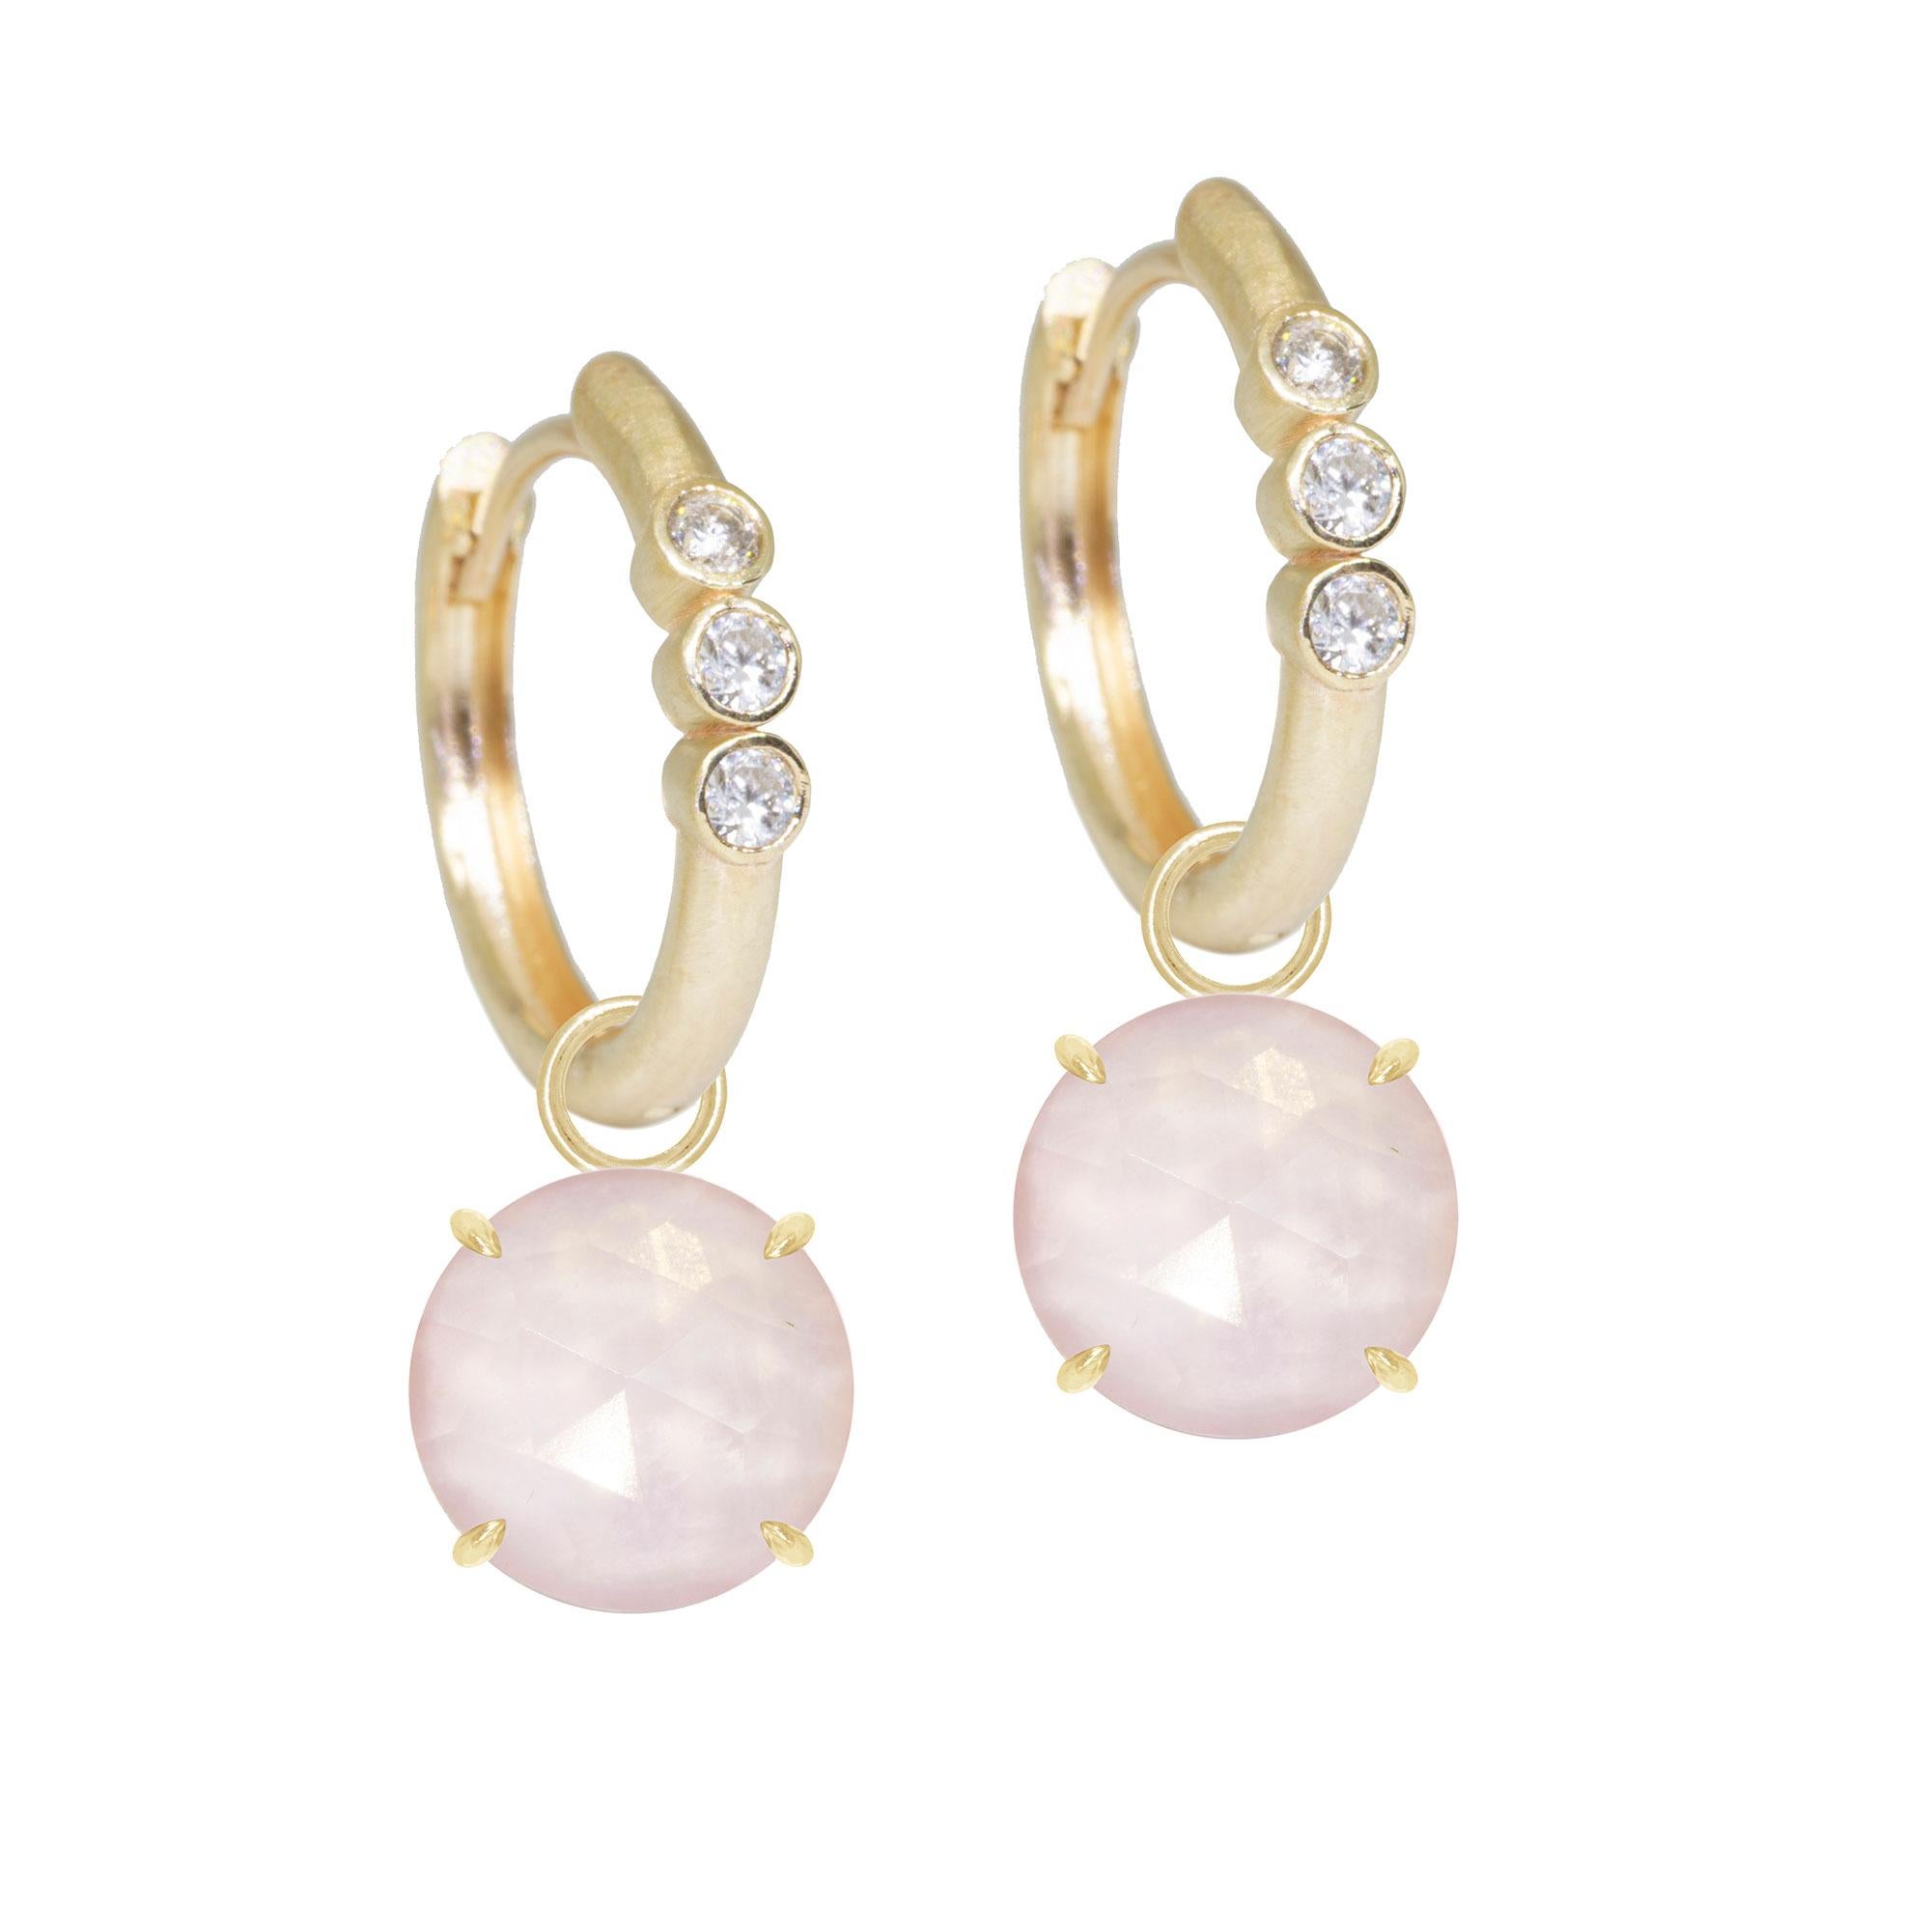 A natural complement to your personal style: Made with faceted rose quartz, these sweet, simple prong-set Petal Gold Charms add extra shimmer to any of our hoops.

Nina Wynn Design's patent-pending earrings have an element on the back of the stud or